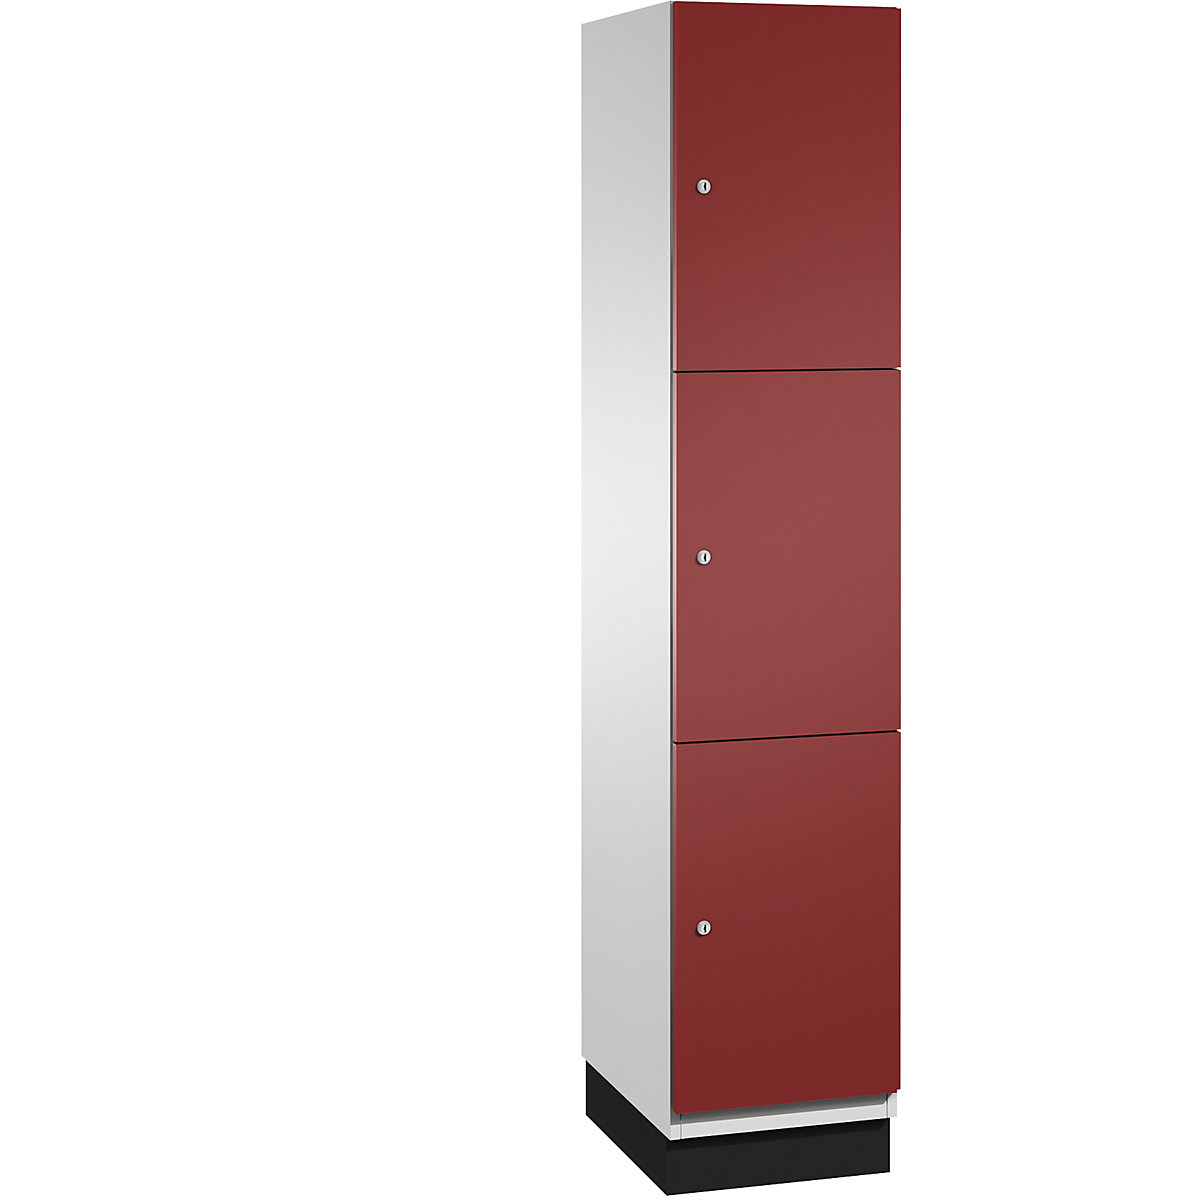 CAMBIO compartment locker with sheet steel doors – C+P, 3 compartments, width 400 mm, body light grey / door ruby red-11